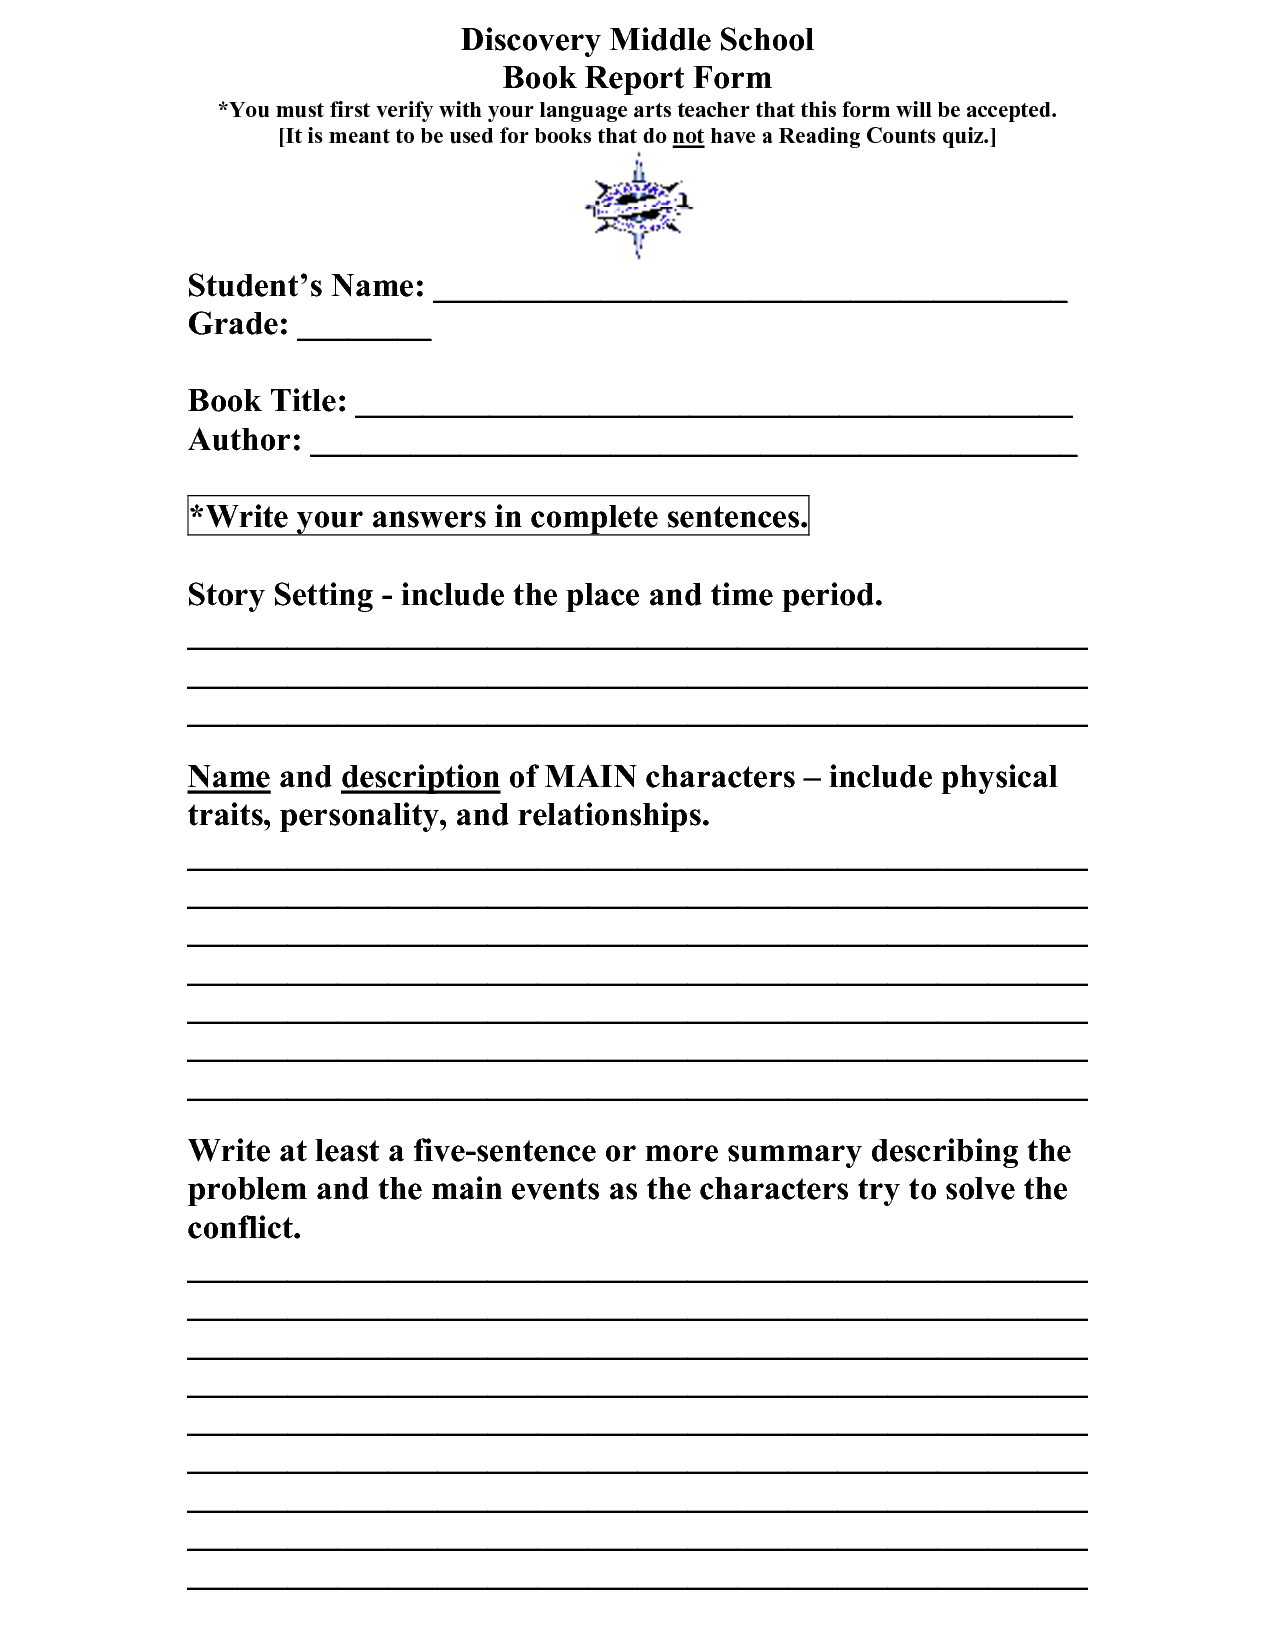 8-best-images-of-middle-school-book-report-printable-middle-school